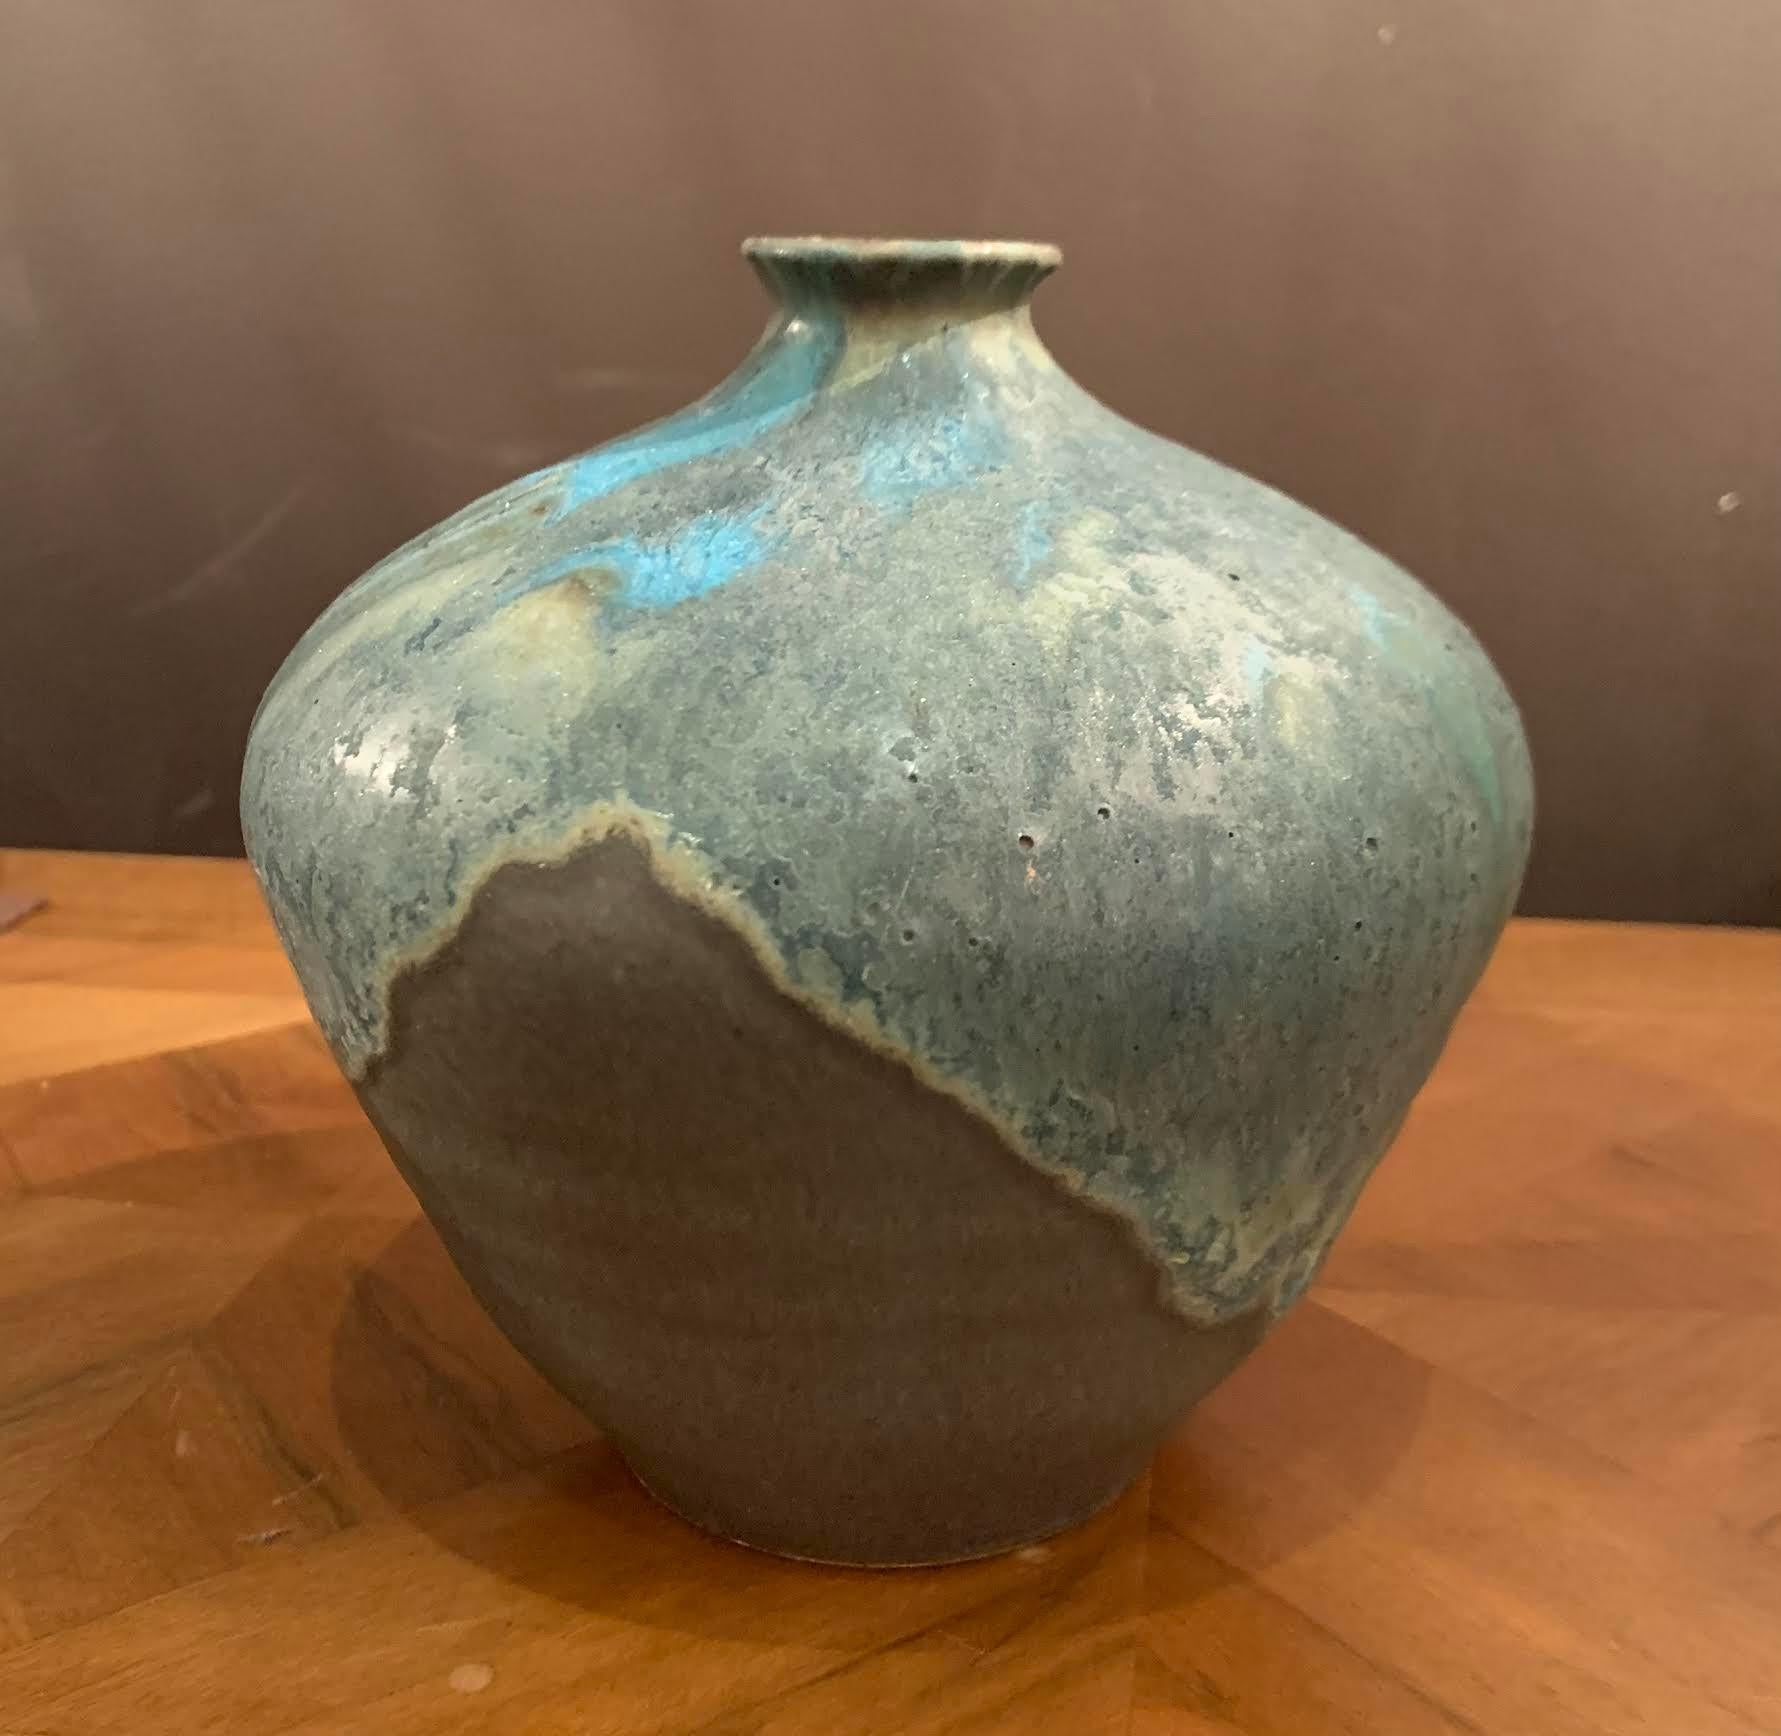 Contemporary American Ceramist Peter Speliolpoulos stoneware vase.
The matte blue glaze, paired with an agate glaze, react to create pieces with a mineral feeling, just unearthed.
One of a kind, hand thrown and glazed piece.
Signed by the